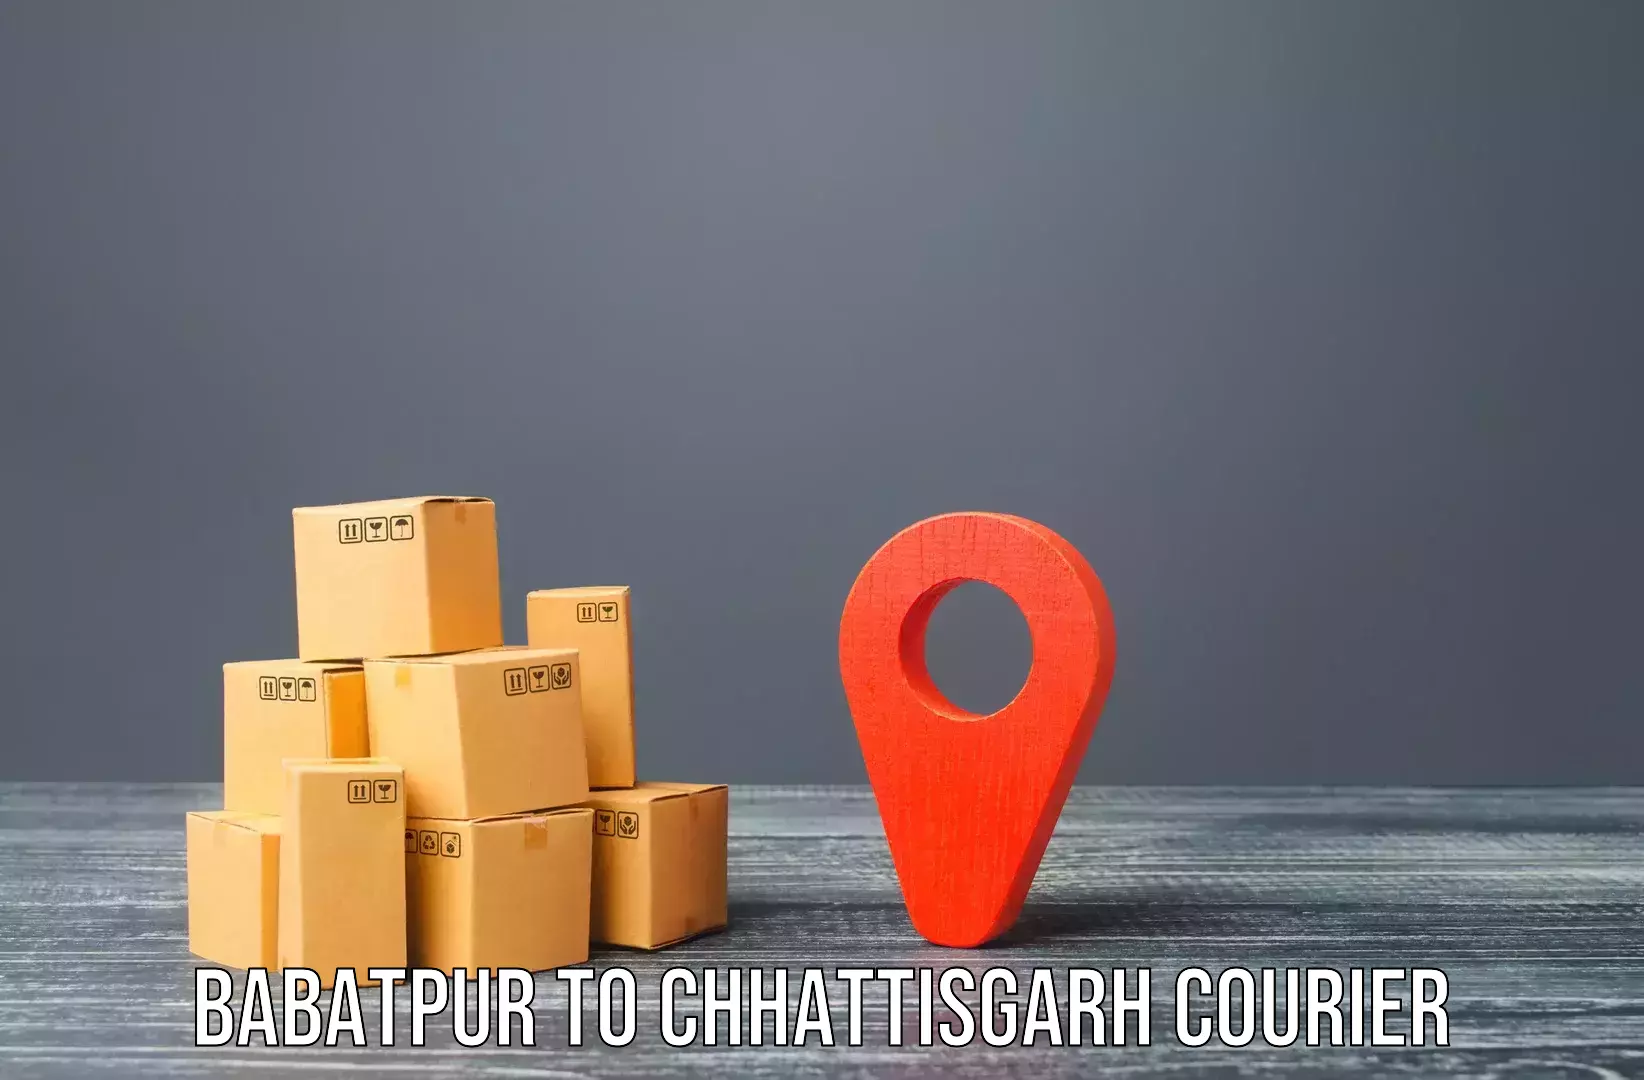 Specialized moving company Babatpur to Dhamtari